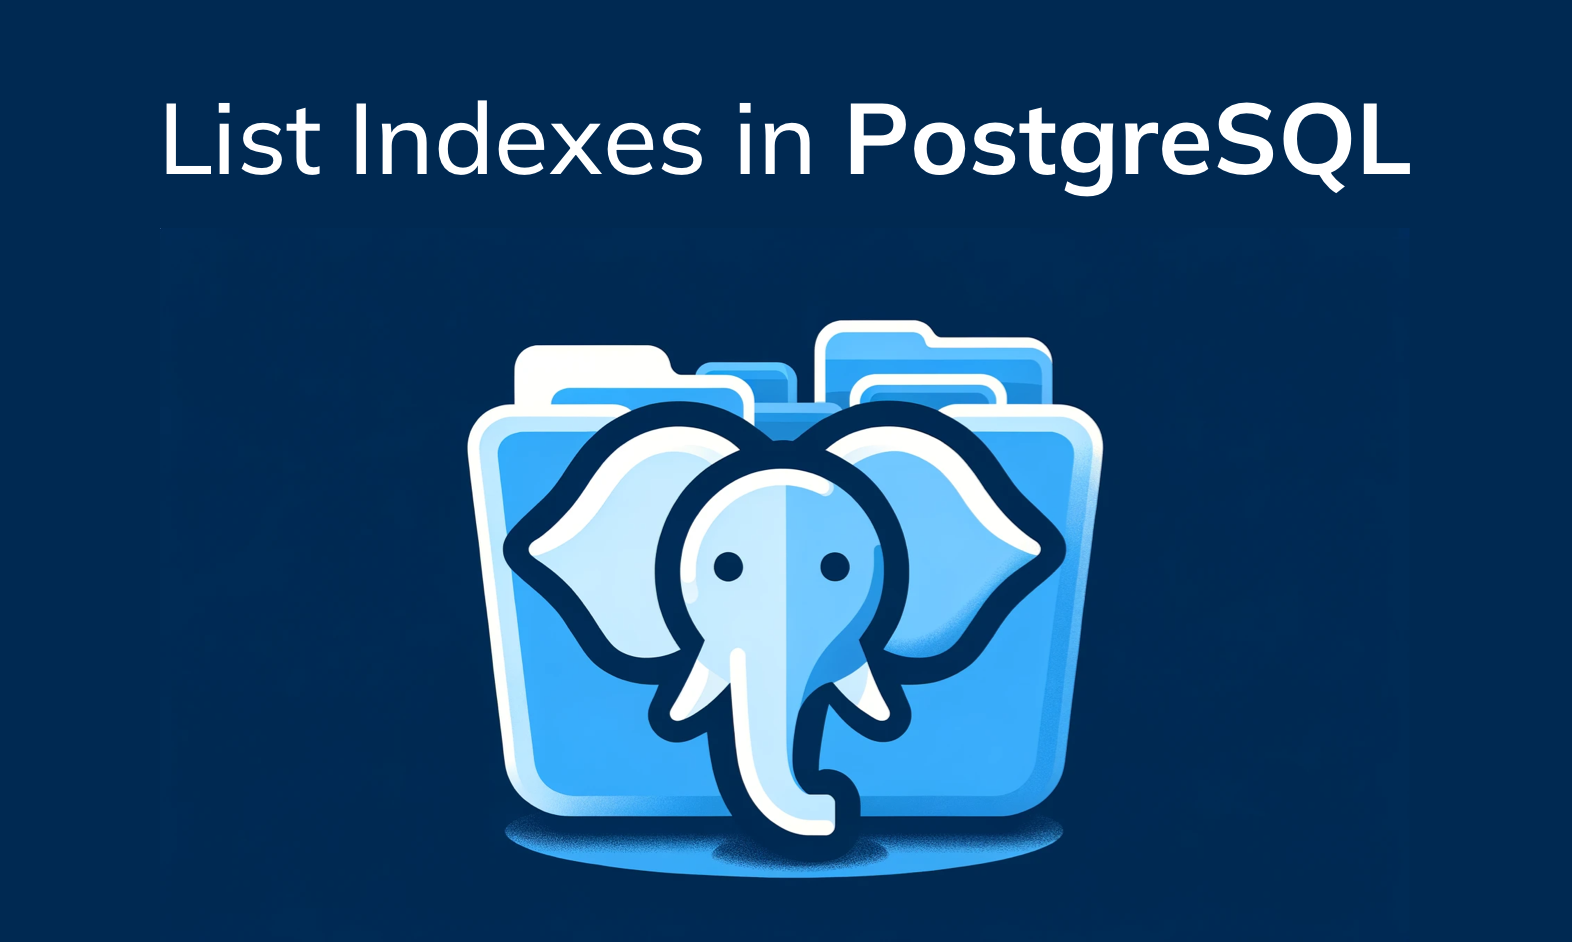 How to List Indexes in PostgreSQL and Related Commands